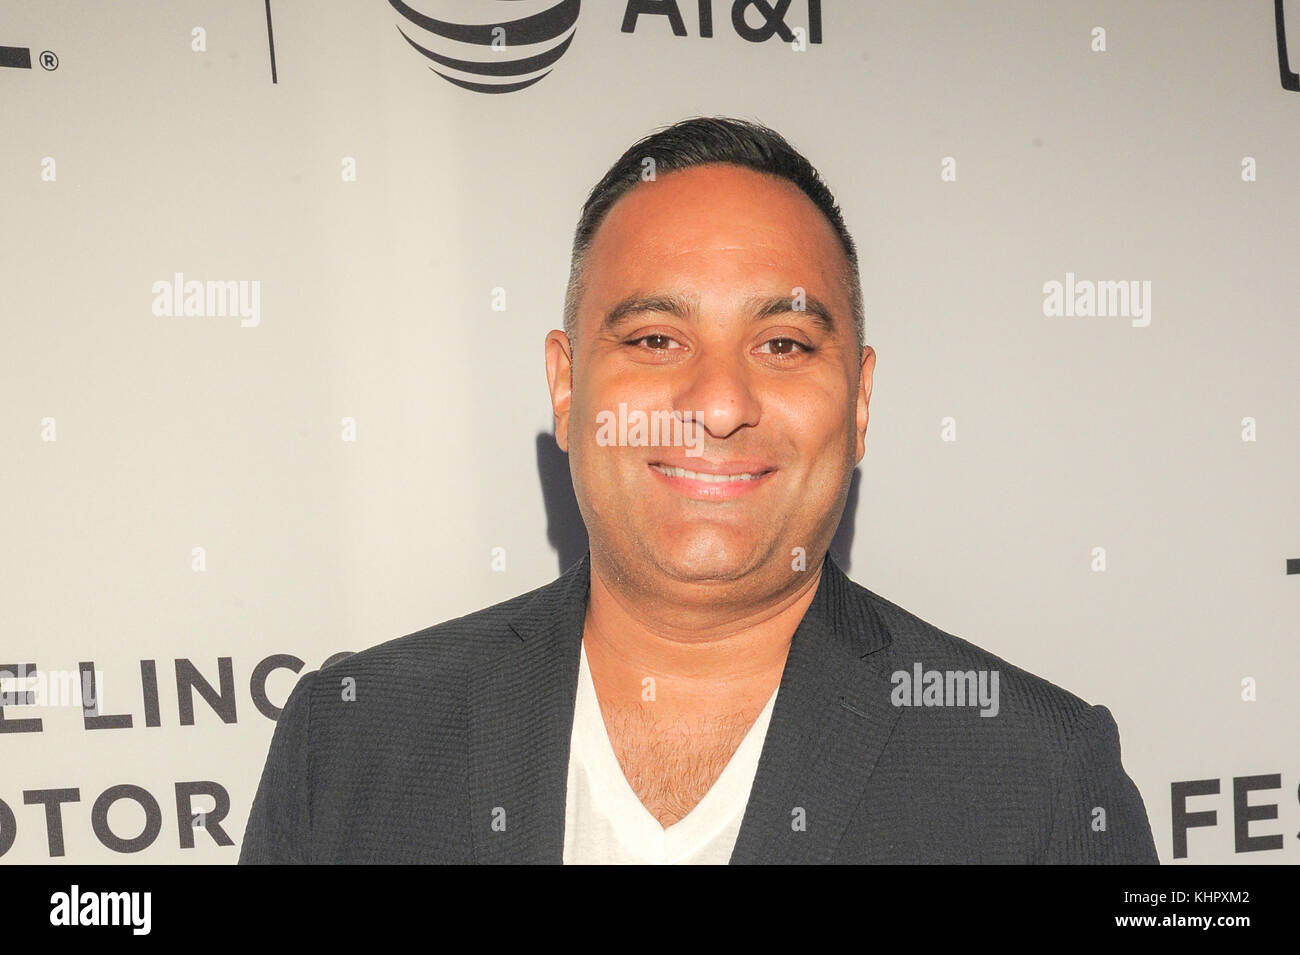 NEW YORK, NY - APRIL 23: Actor Russell Peters attends 'The Clapper' Premiere during the 2017 Tribeca Film Festival at SVA Theatre on April 23, 2017 in NYC. Stock Photo